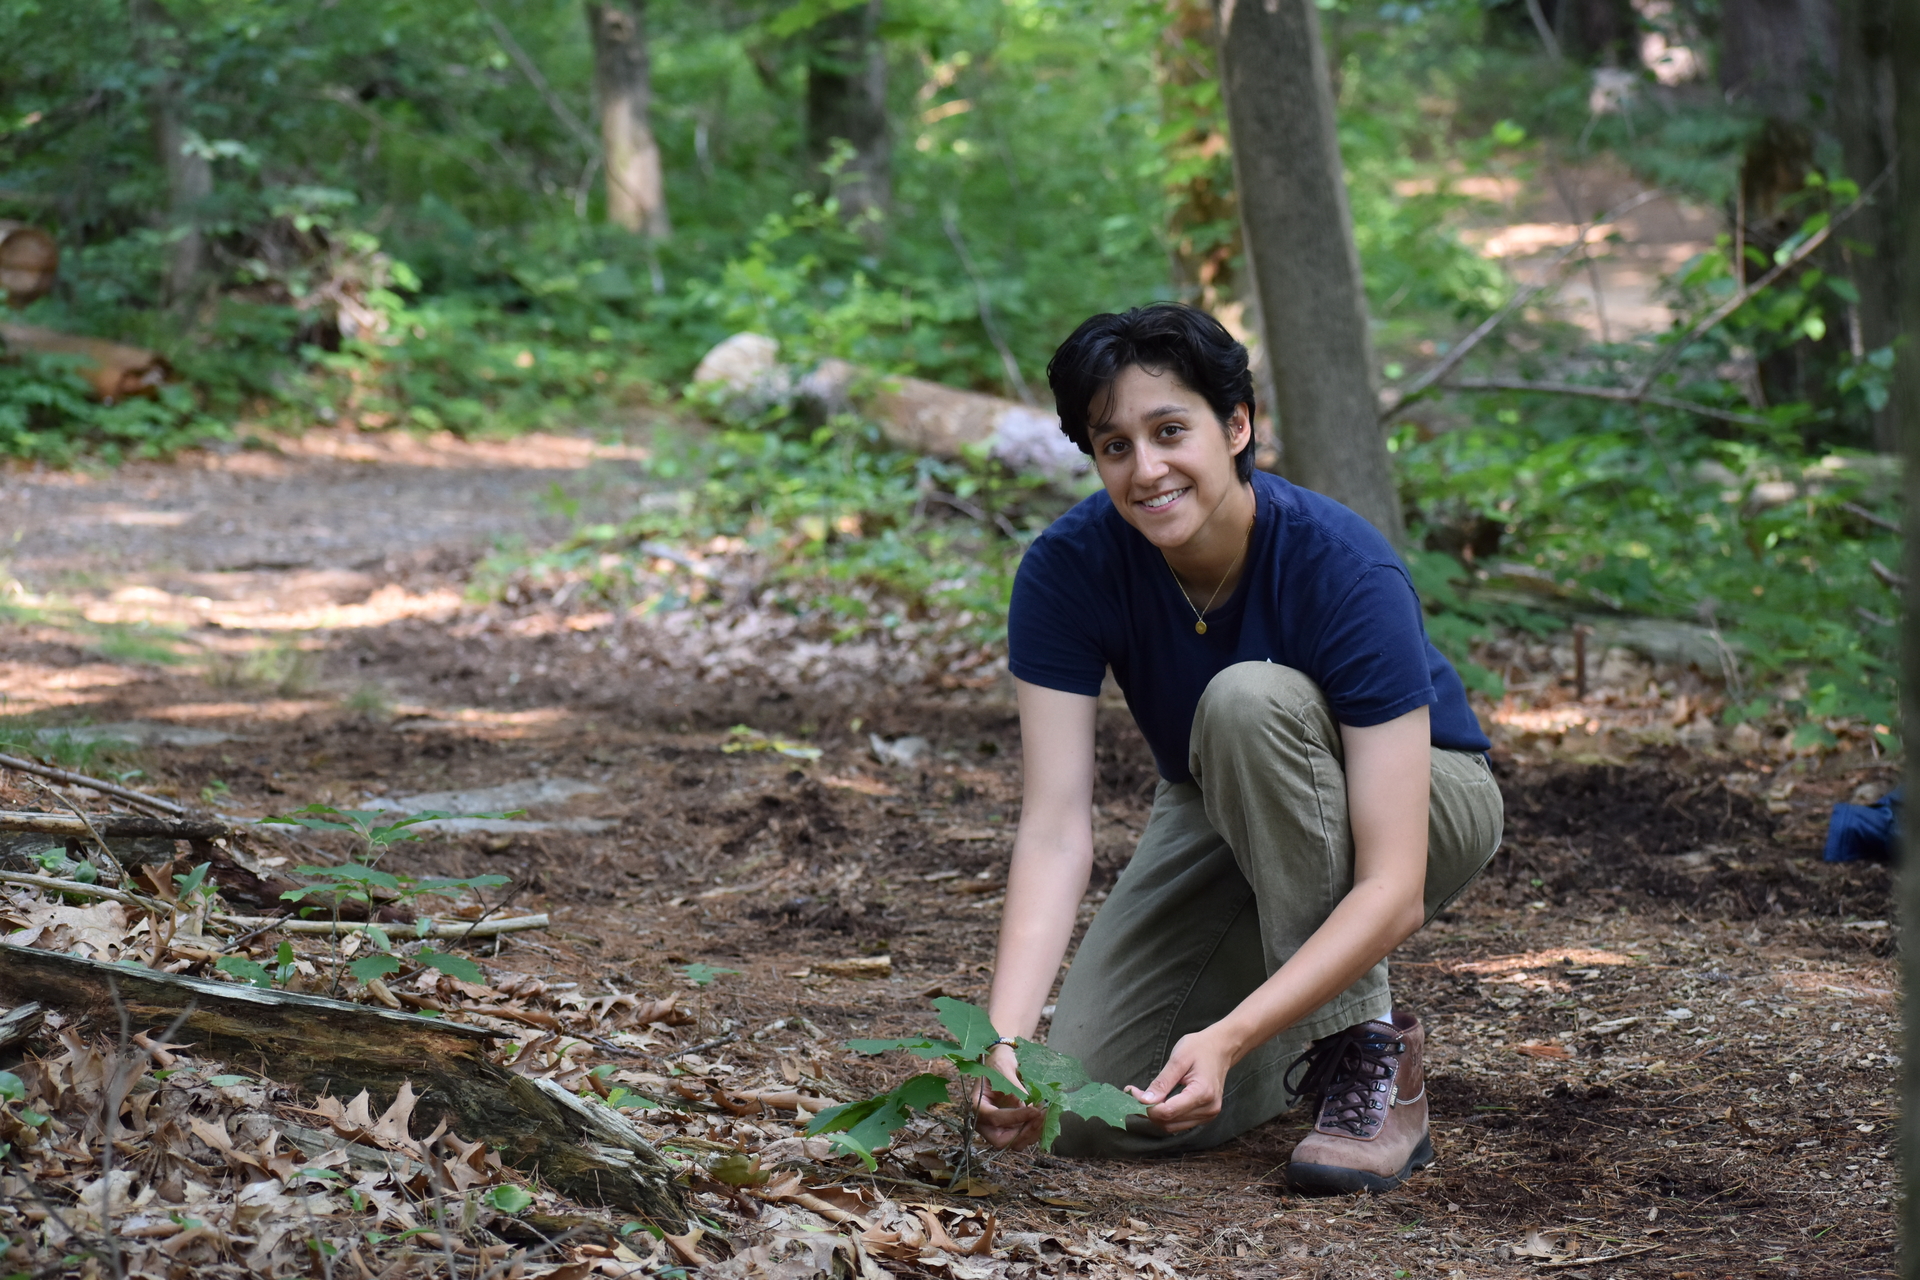 A person in a blue shirt and khakis bent on their knees on a path in the woods, their hands touch leaves on the ground.